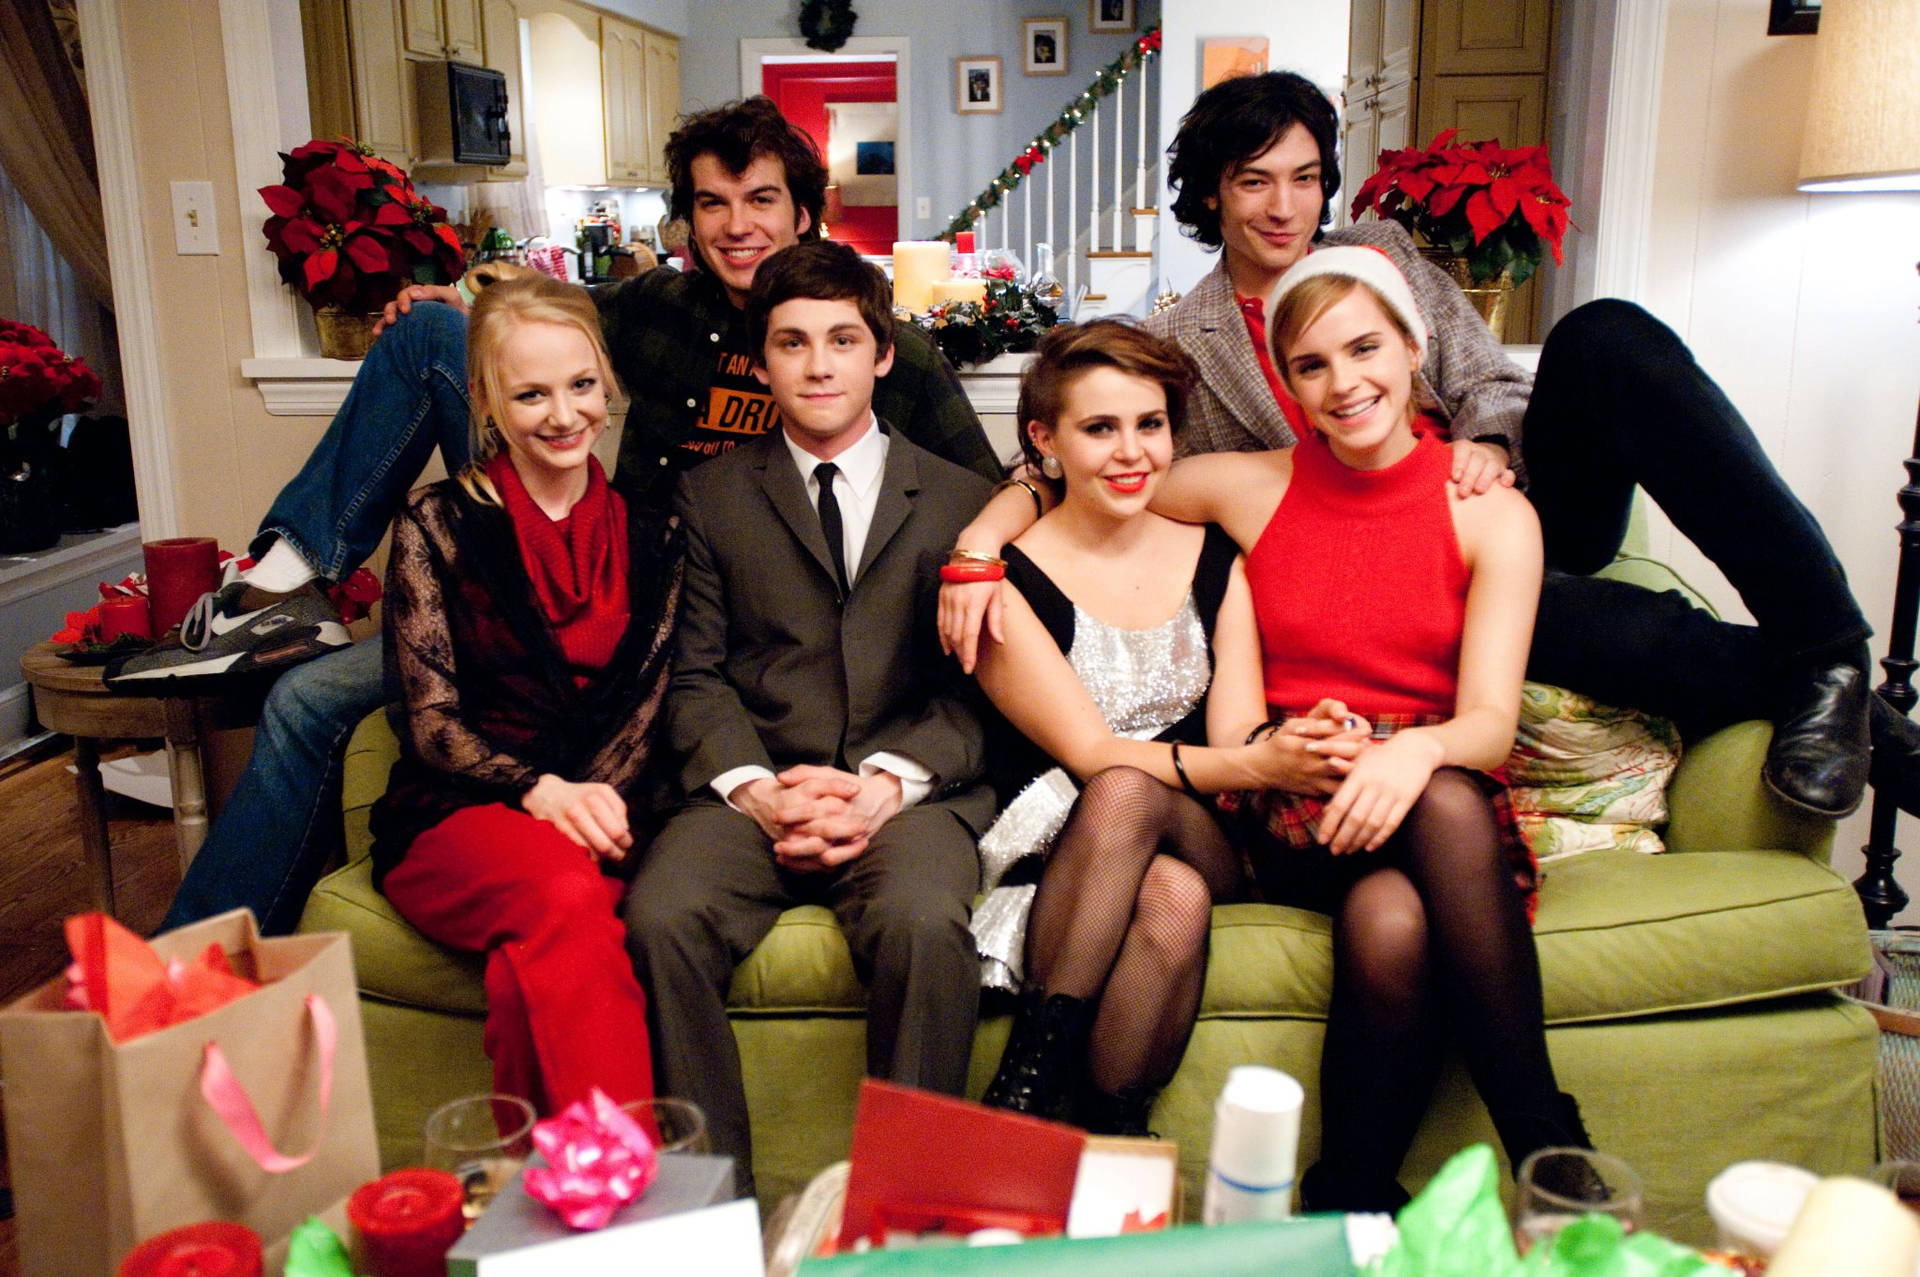 The Perks Of Being A Wallflower Christmas Party Background